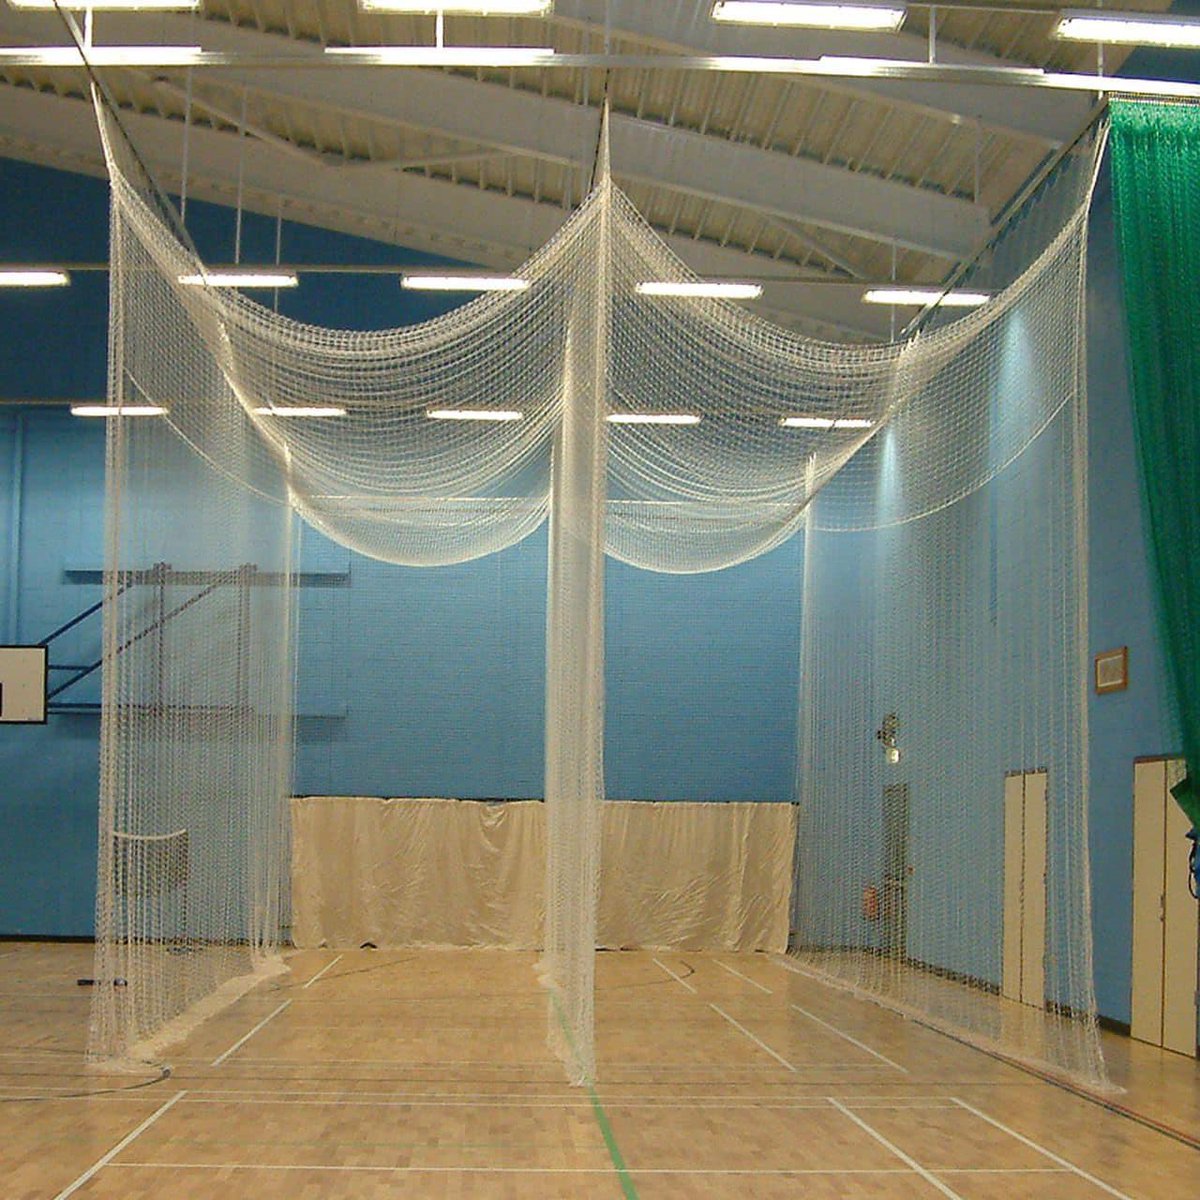 We begin our centenary year preparation with the start of winter indoor net sessions from Thursday 1 February 6pm-9pm in the sportshall at Deanery High School, Wigan. For new players who want more information pls contact James Taylor, Director of Senior Cricket on 07531 713488